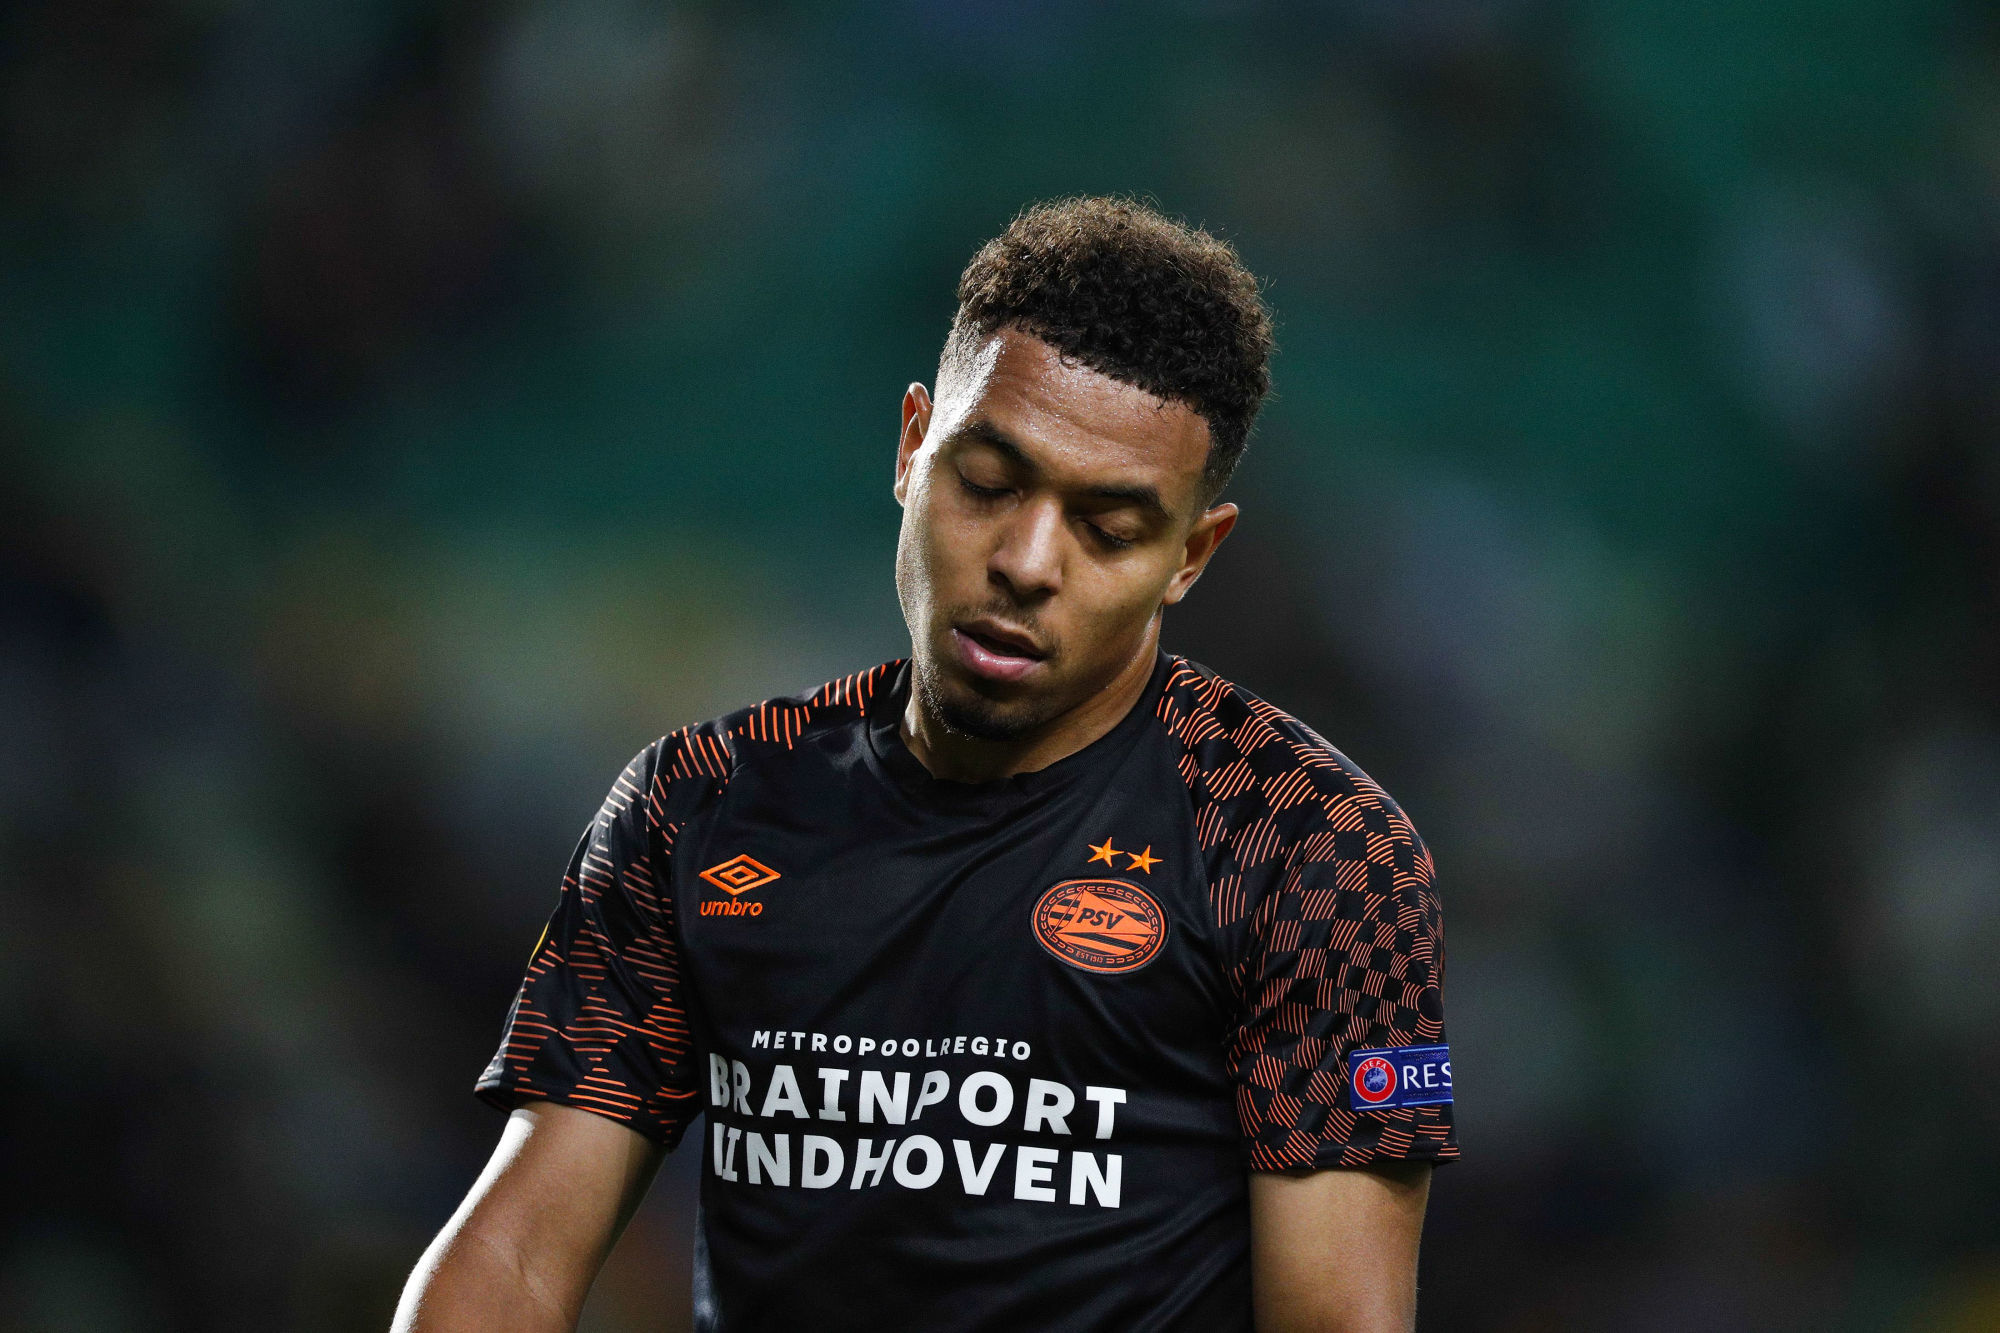 Donyell Malen of PSV during the UEFA Europa League group D match between Sporting Club de Portugal and PSV Eindhoven at the Estadio Jose Alvalade on November 28, 2019 in Lisbon, Portugal 

Photo by Icon Sport - Donyell MALEN - Estadio Jose Alvalade - Lisbonne (Portugal)